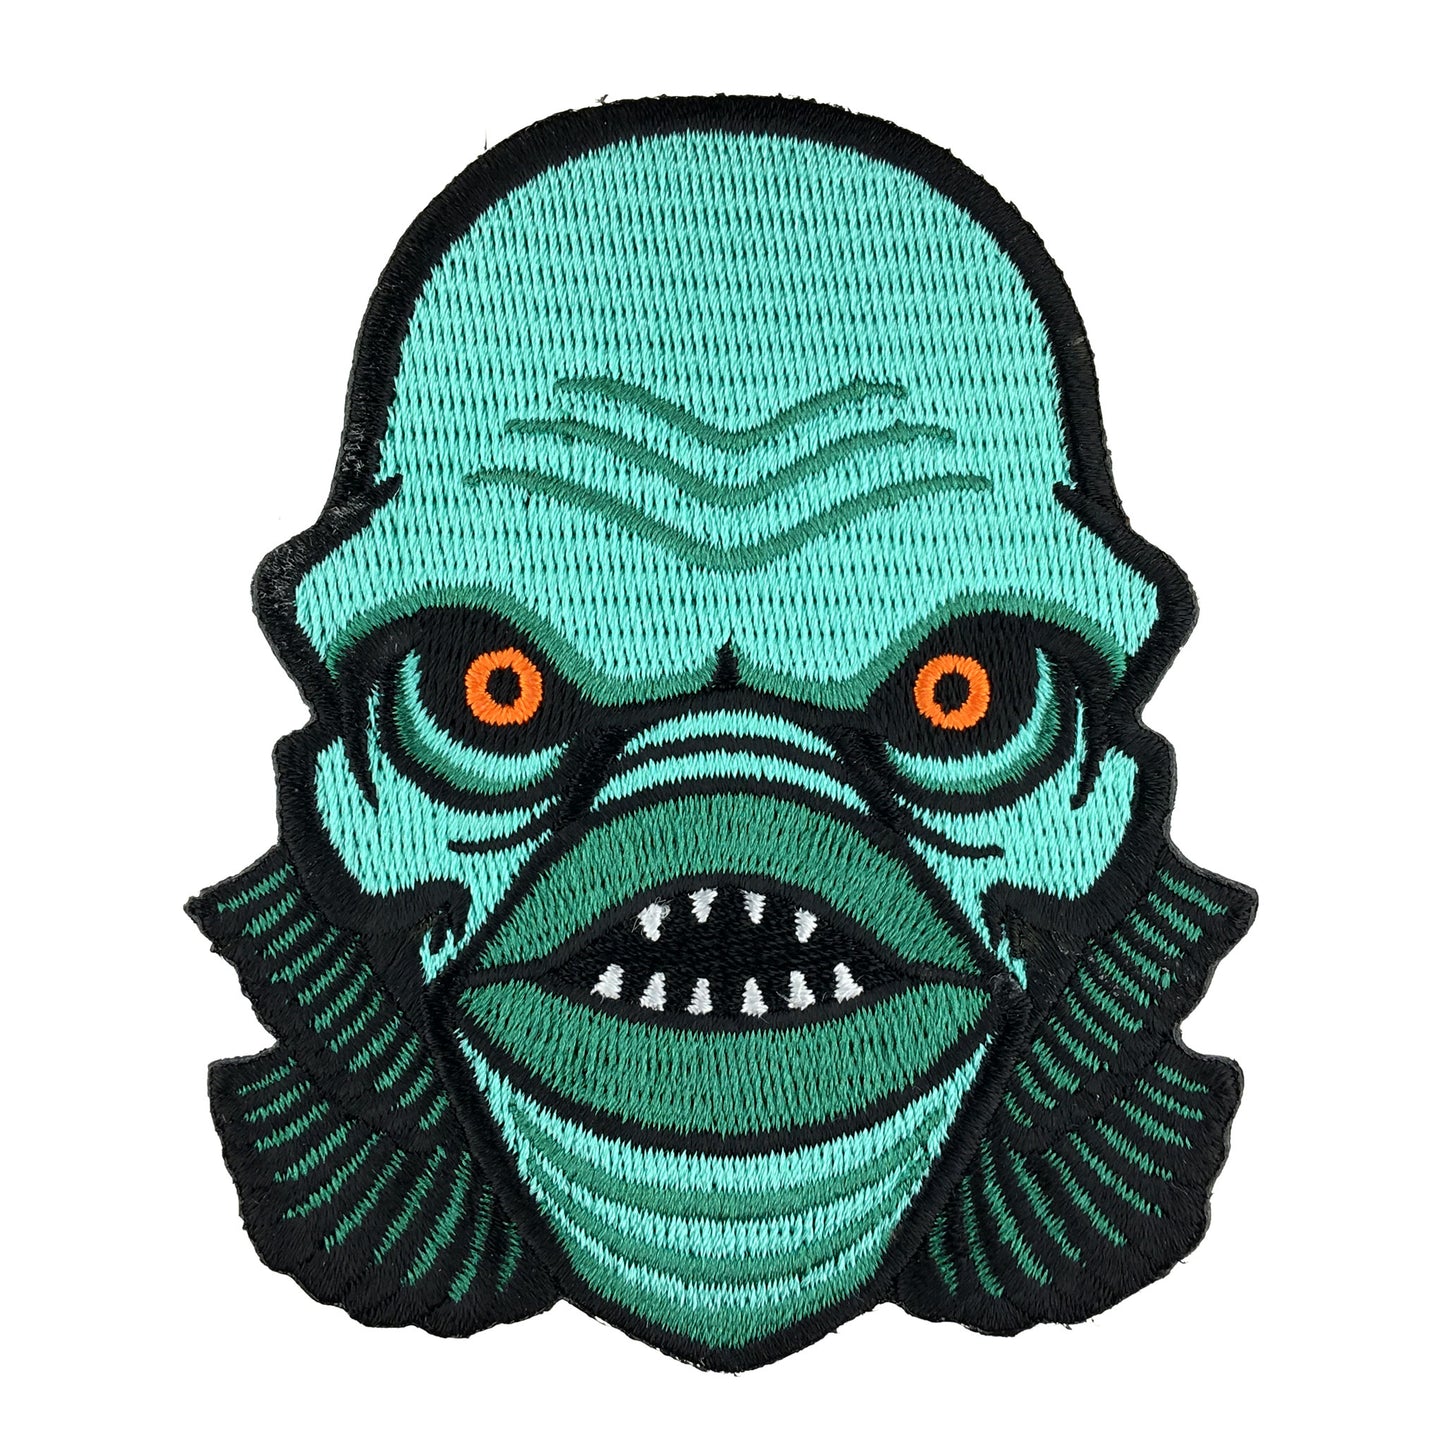 Lagoon Creature horror monster head embroidered patch by Monsterologist